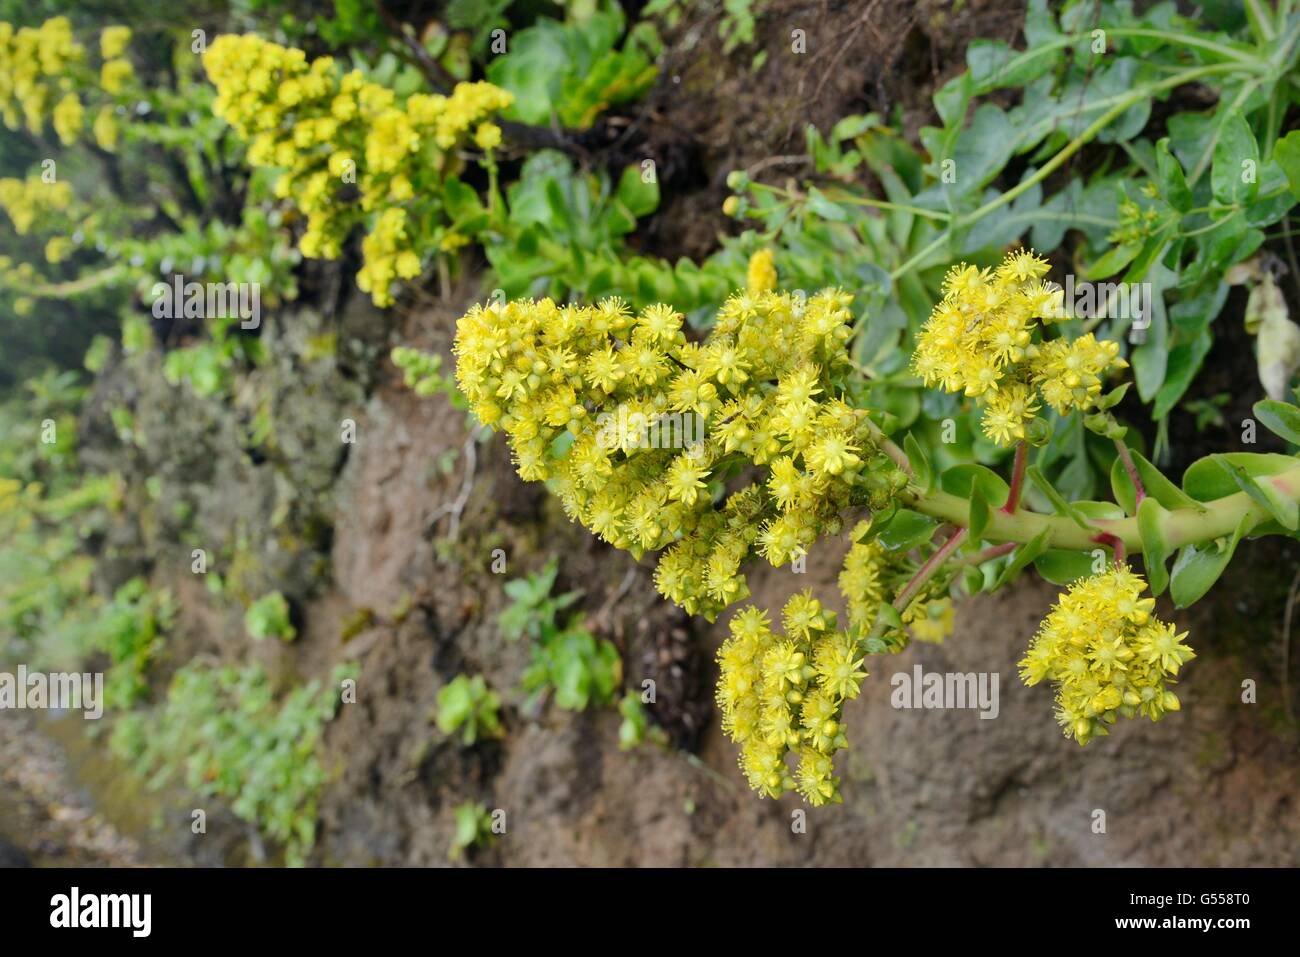 Tree houseleek (Aeonium cuneatum), an endemic species of the Anaga mountians, flowering flowering on a rocky slope, Tenerife. Stock Photo